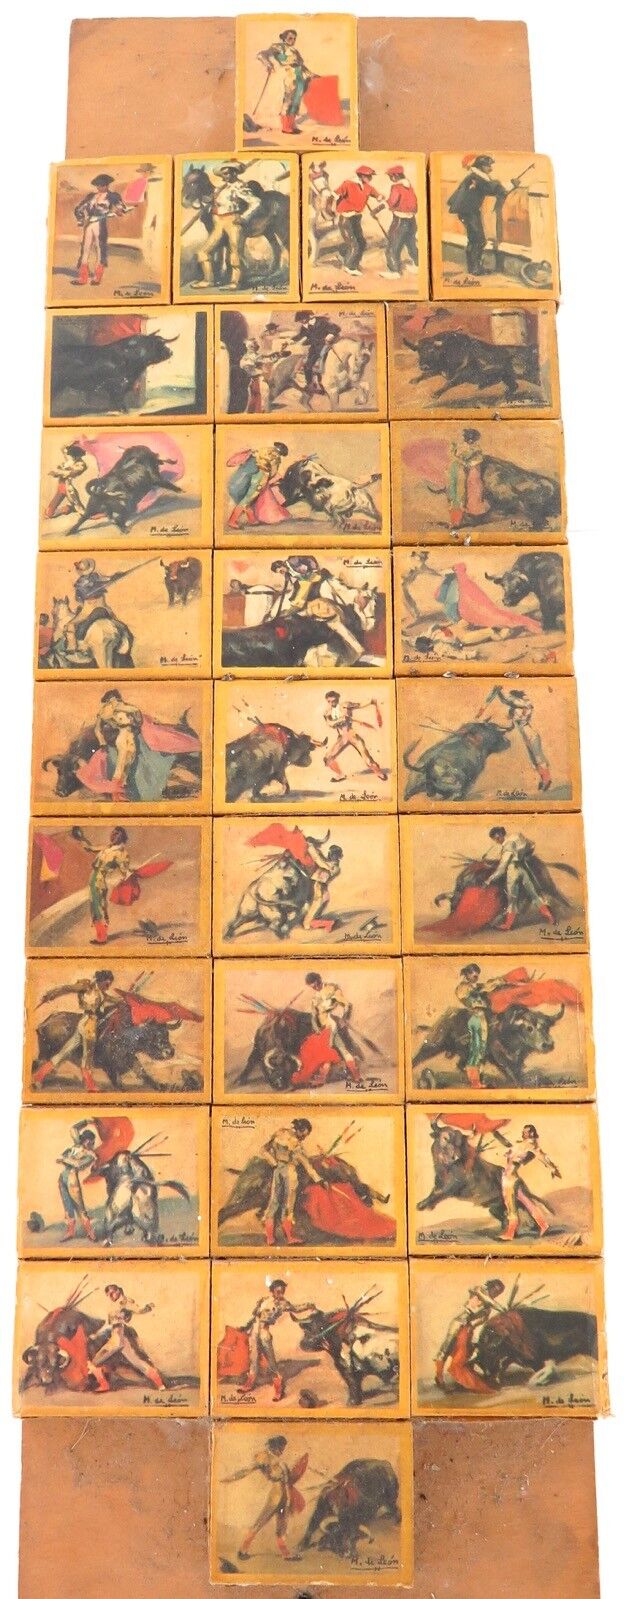 .c1950’s RARE / BIZZARE COLLECTION SPANISH BULLFIGHTING MATCHBOXES